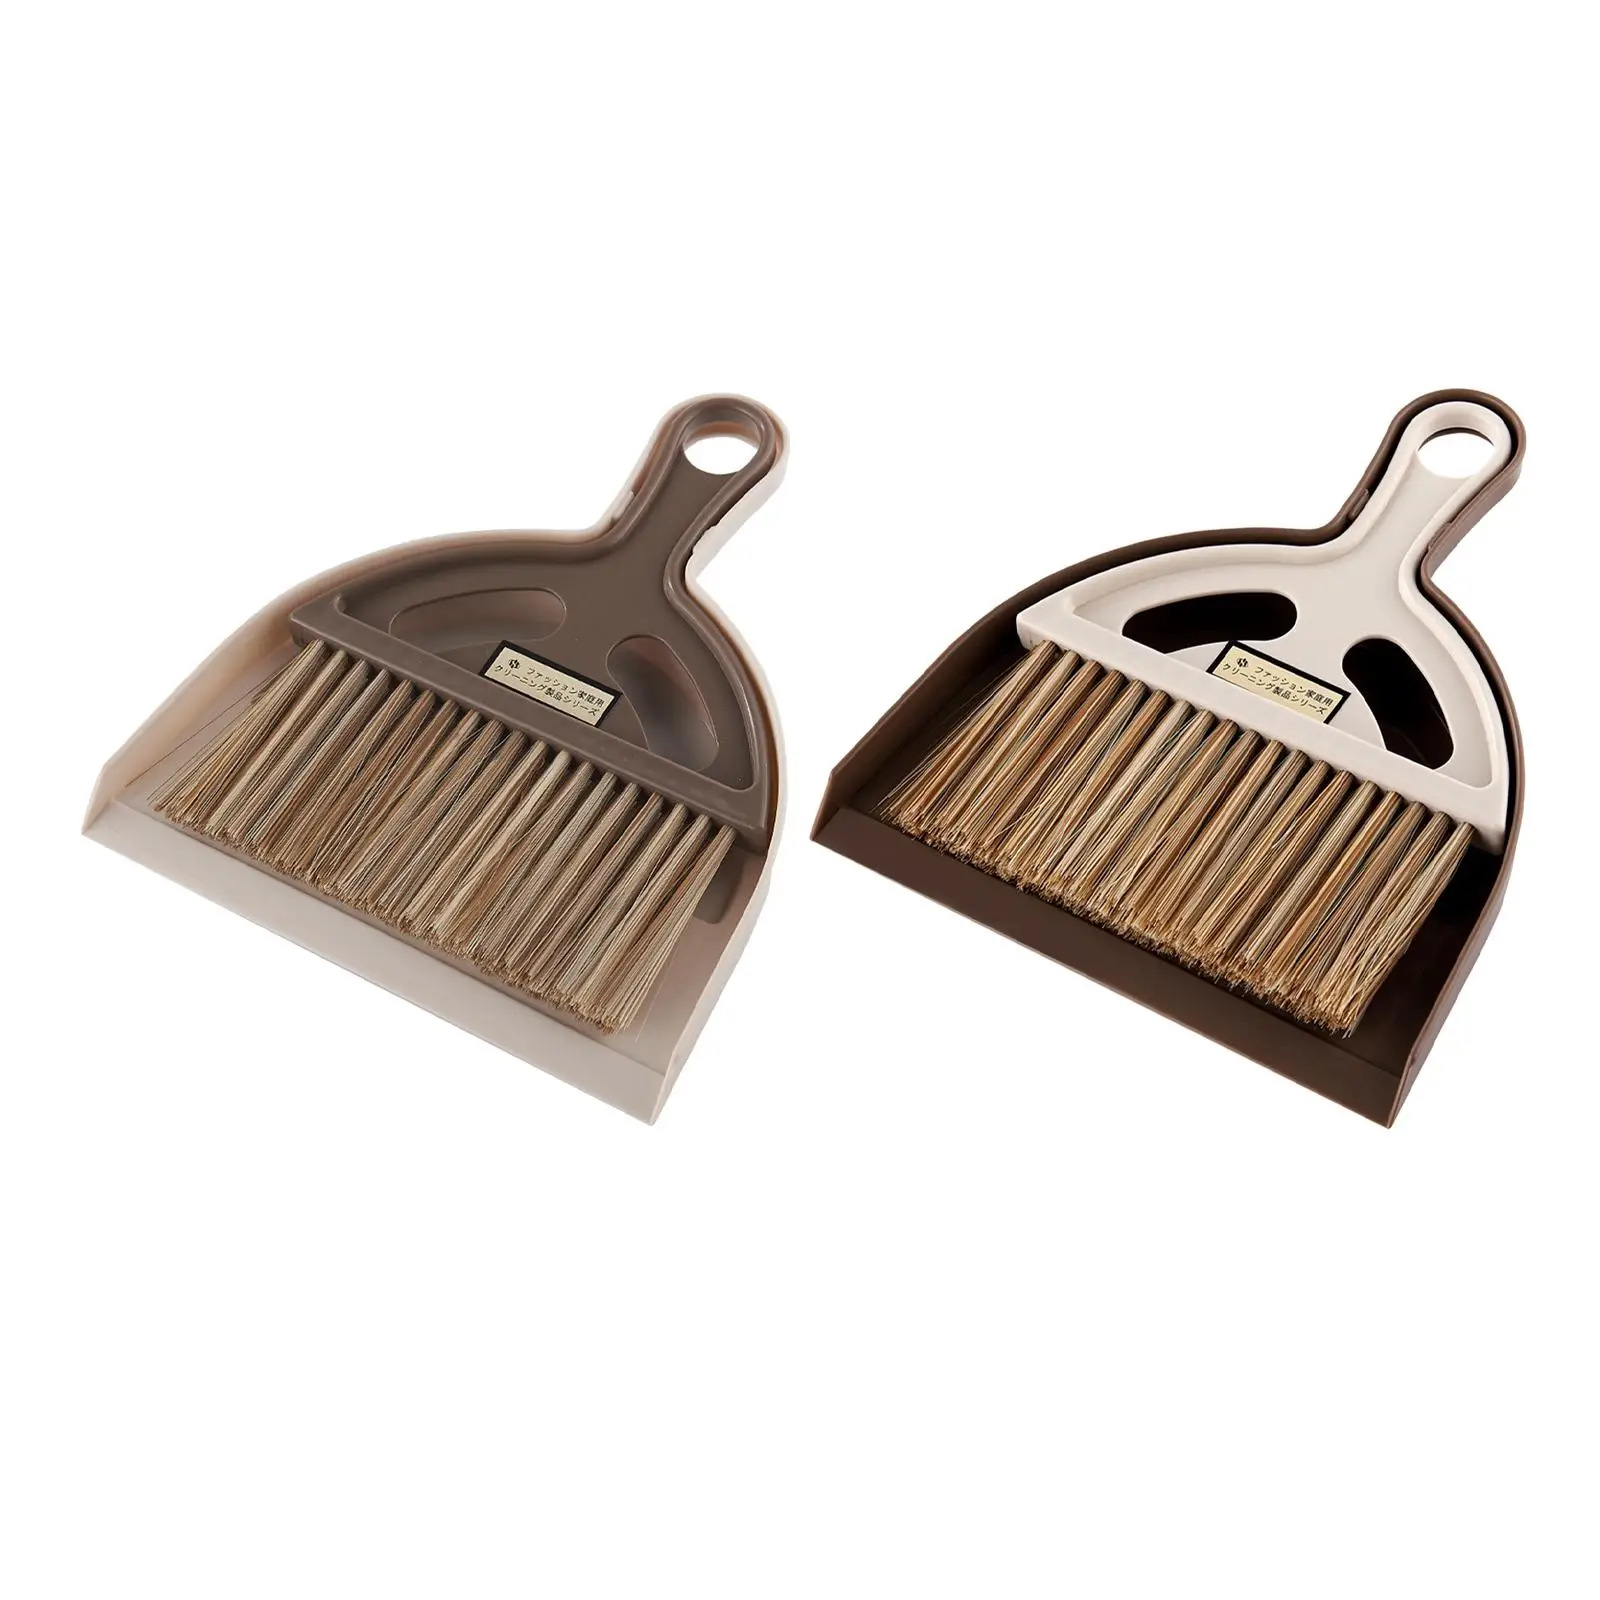 Small Broom and Dustpan Set Small Dustpan and Brush Set Portable for Desktop Camping Small Animal Cage Sofa Cleaning Tools